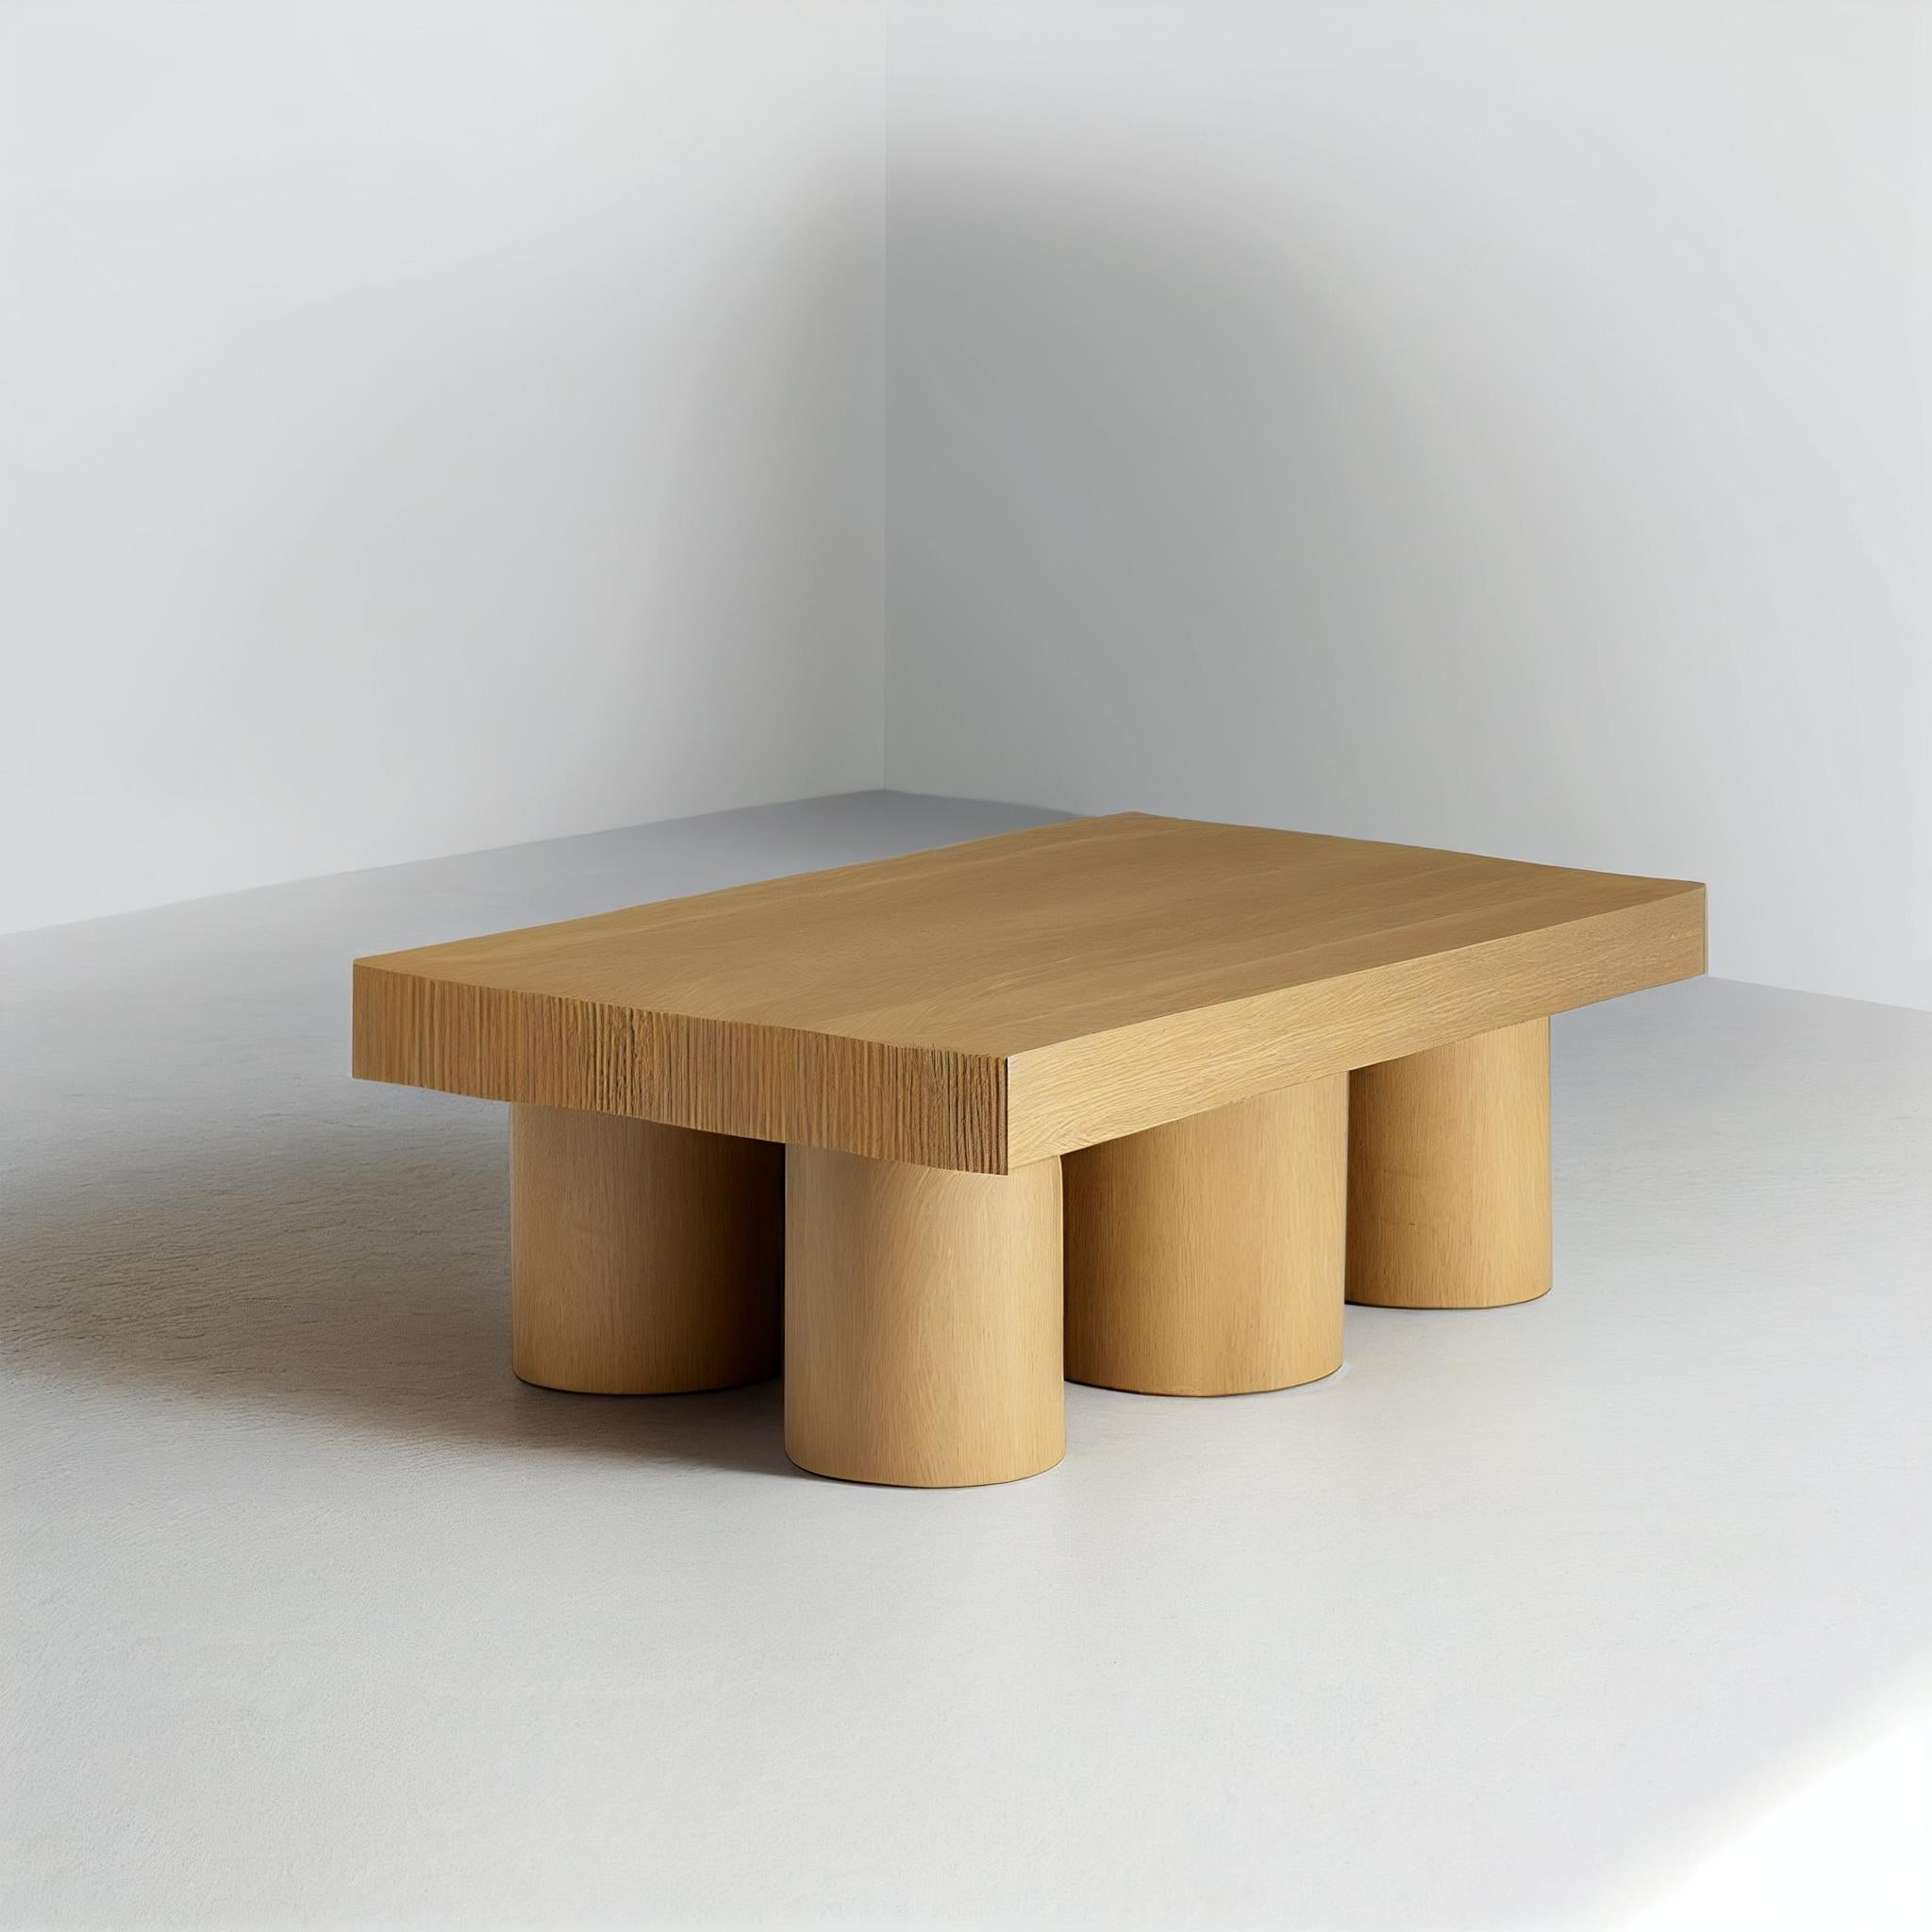 Brutalist Rectangular Coffee Table in Warm Wood Veneer, Podio by NONO For Sale 1